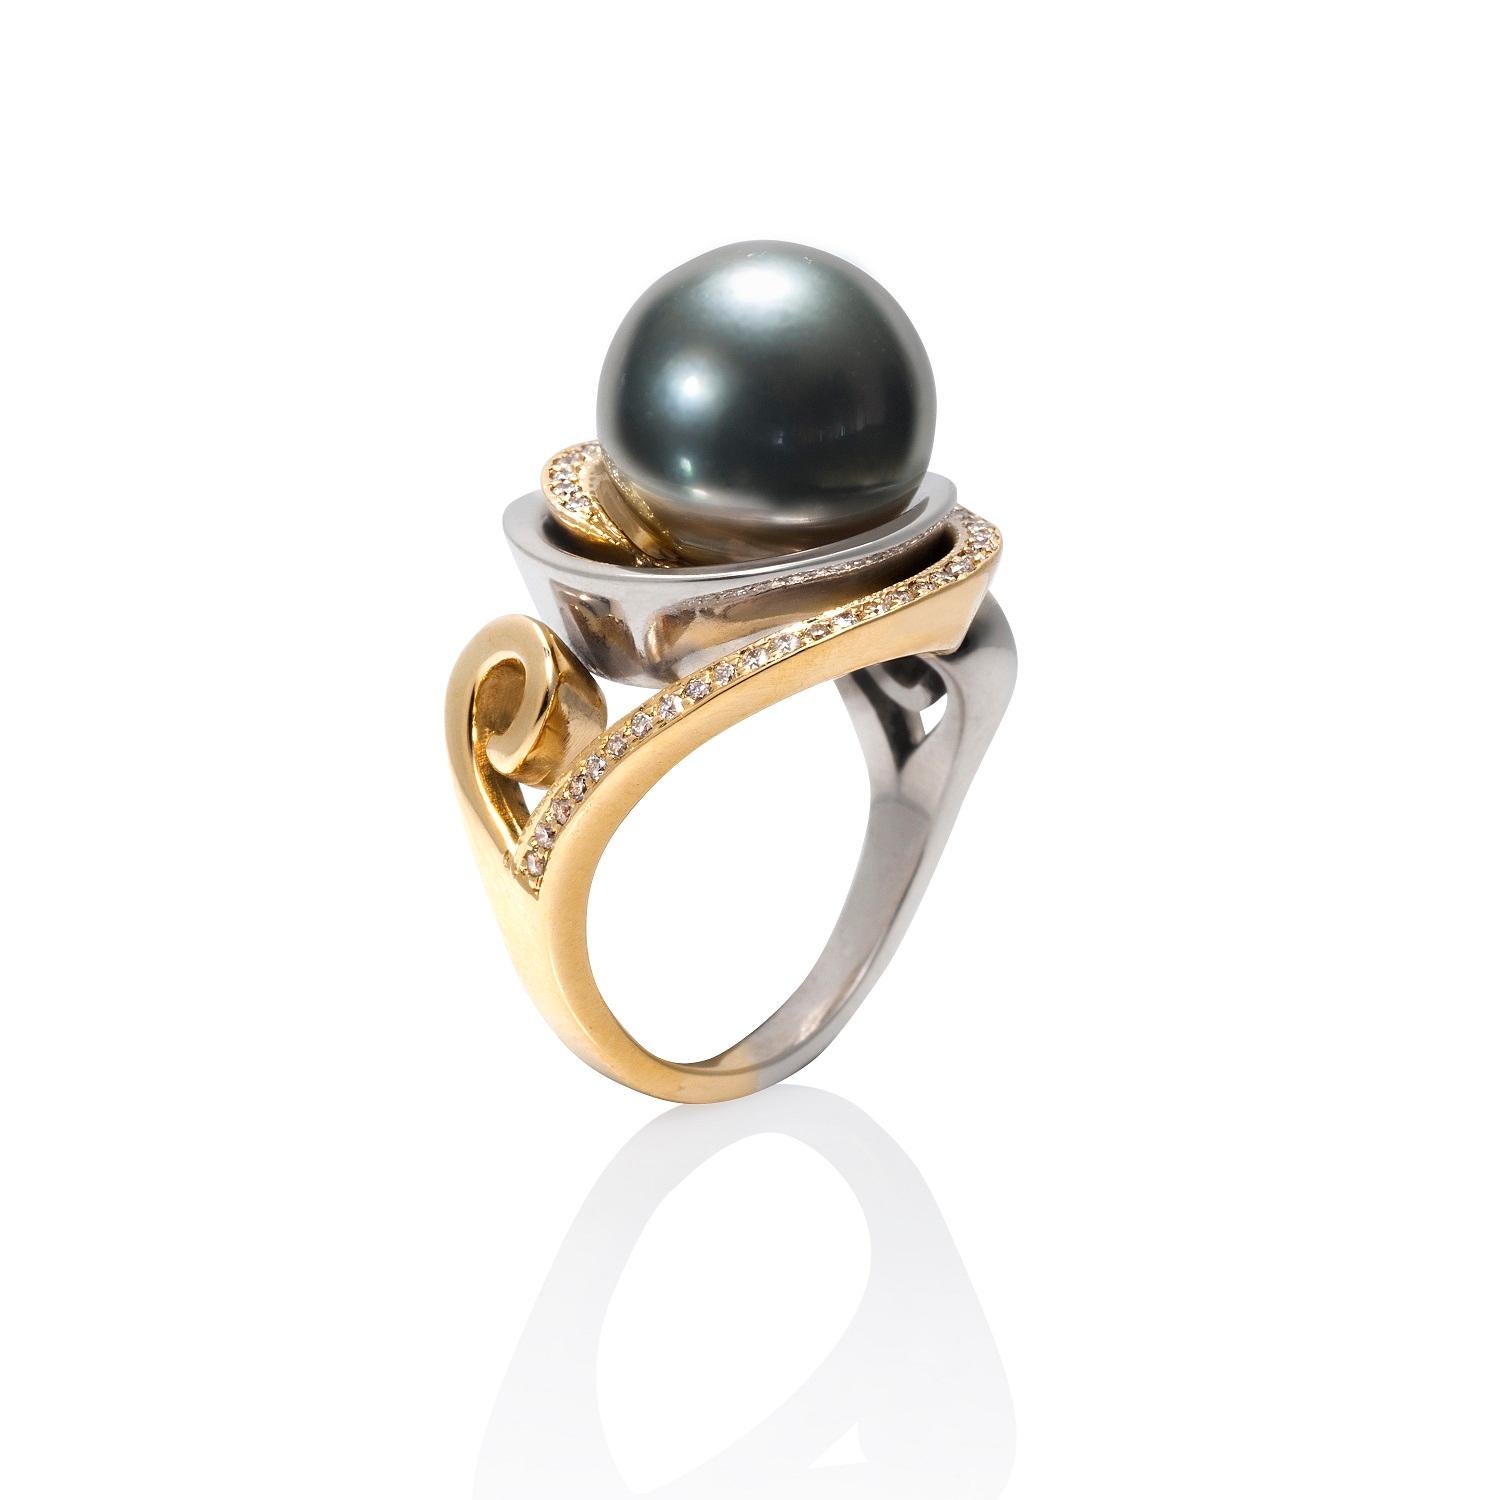 The Nebula Cocktail Ring with the 12mm natural Black Tahitian pearl is a ring with interlocking spirals of 14ky and argentium sterling silver that wrap around the pearl. The 14k spiral is pave set with sixty-eight 0.8mm VS2-SI1 diamonds.

This ring